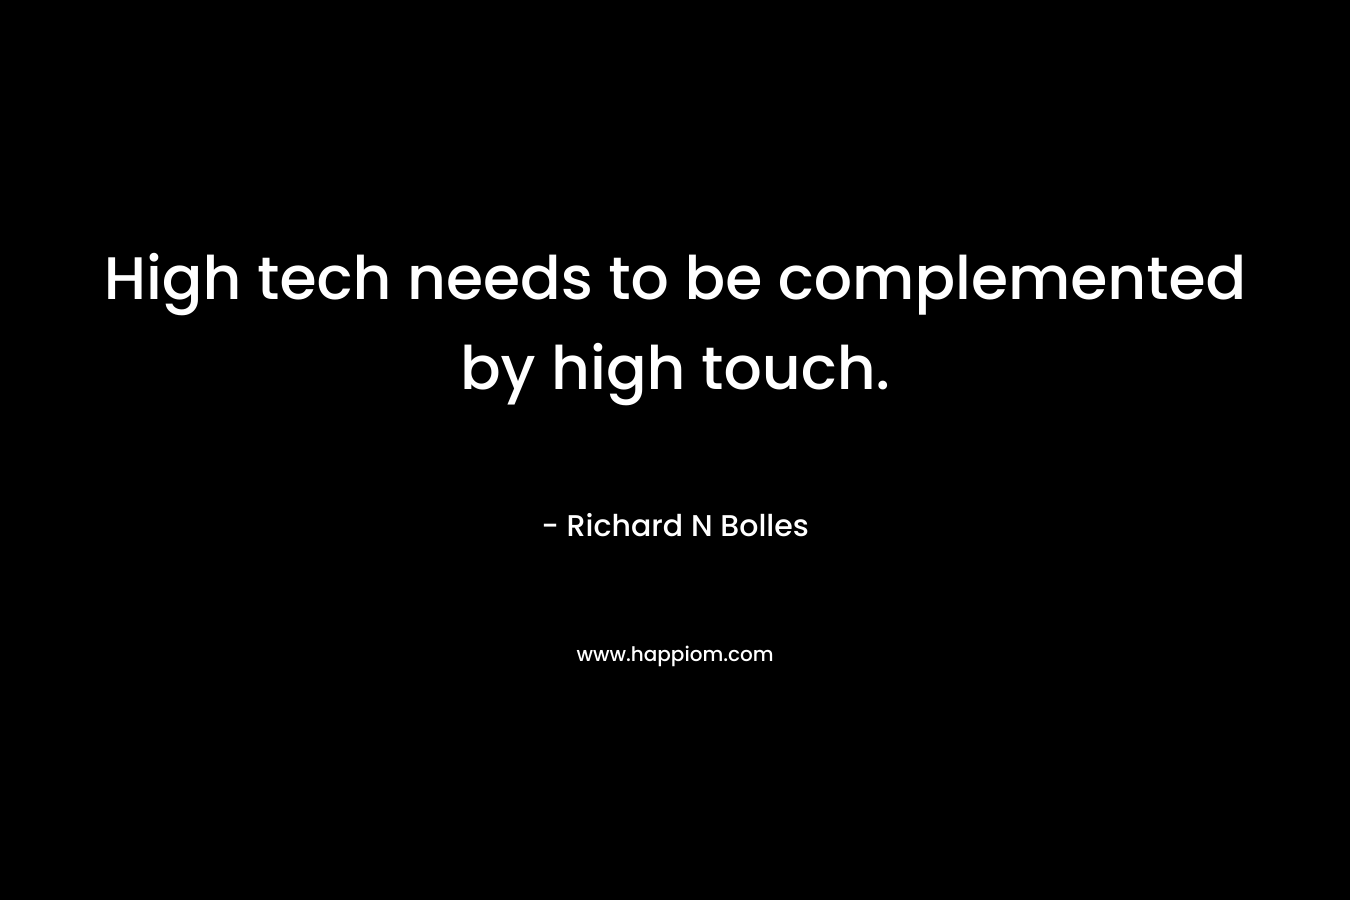 High tech needs to be complemented by high touch. – Richard N Bolles